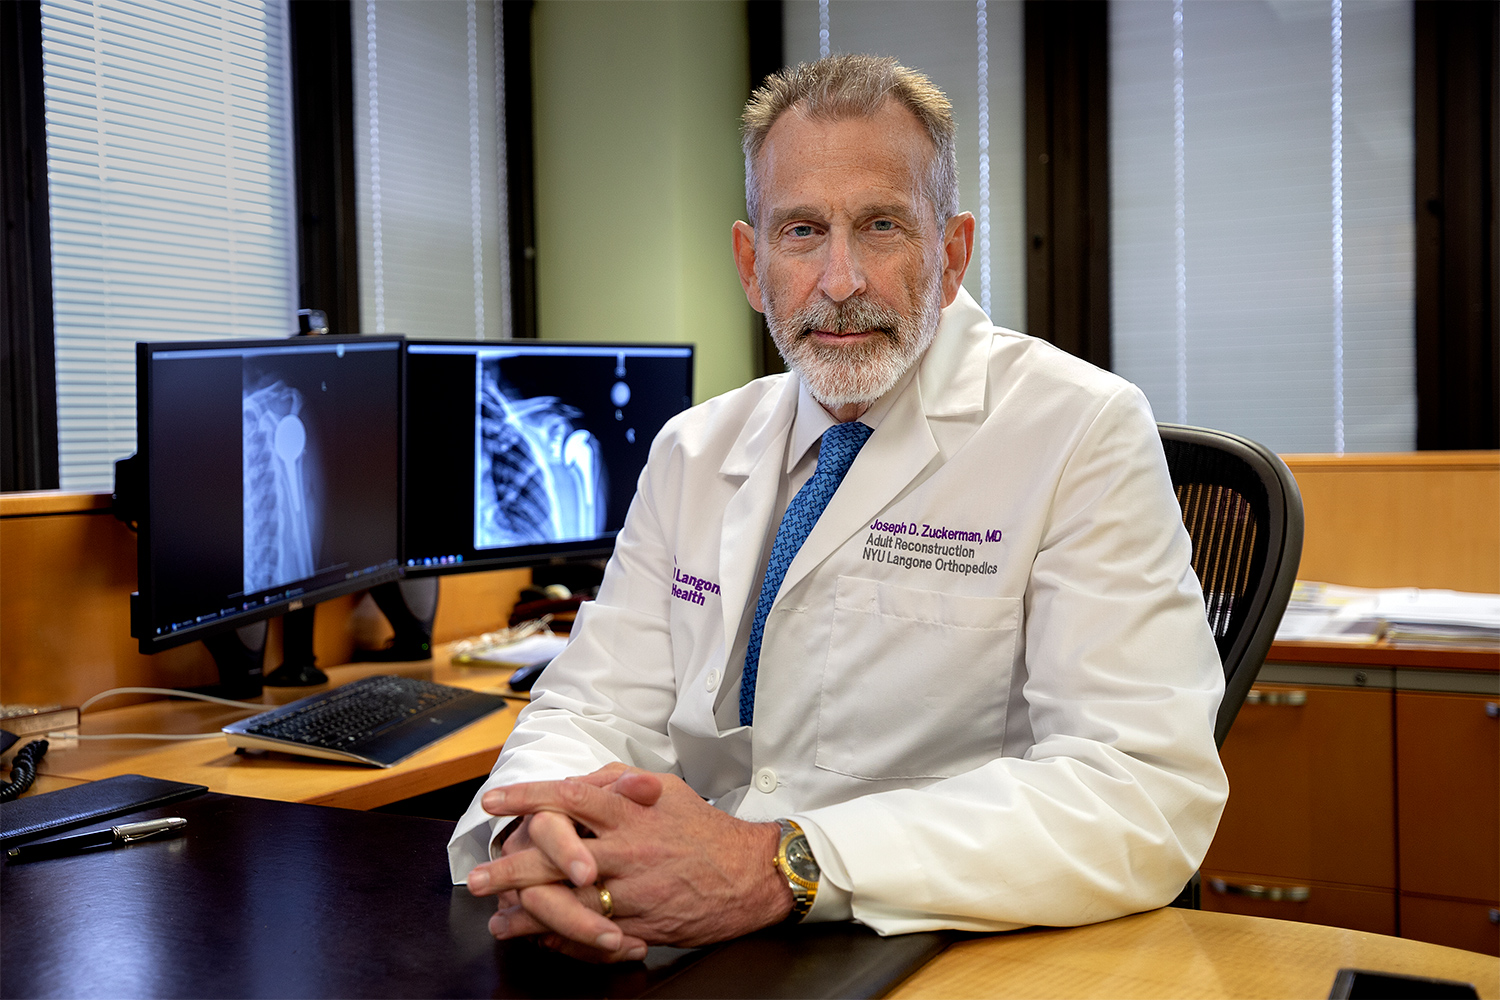 Nyu Langone Orthopedic Surgeons Present Latest Clinical Findings Research At The American